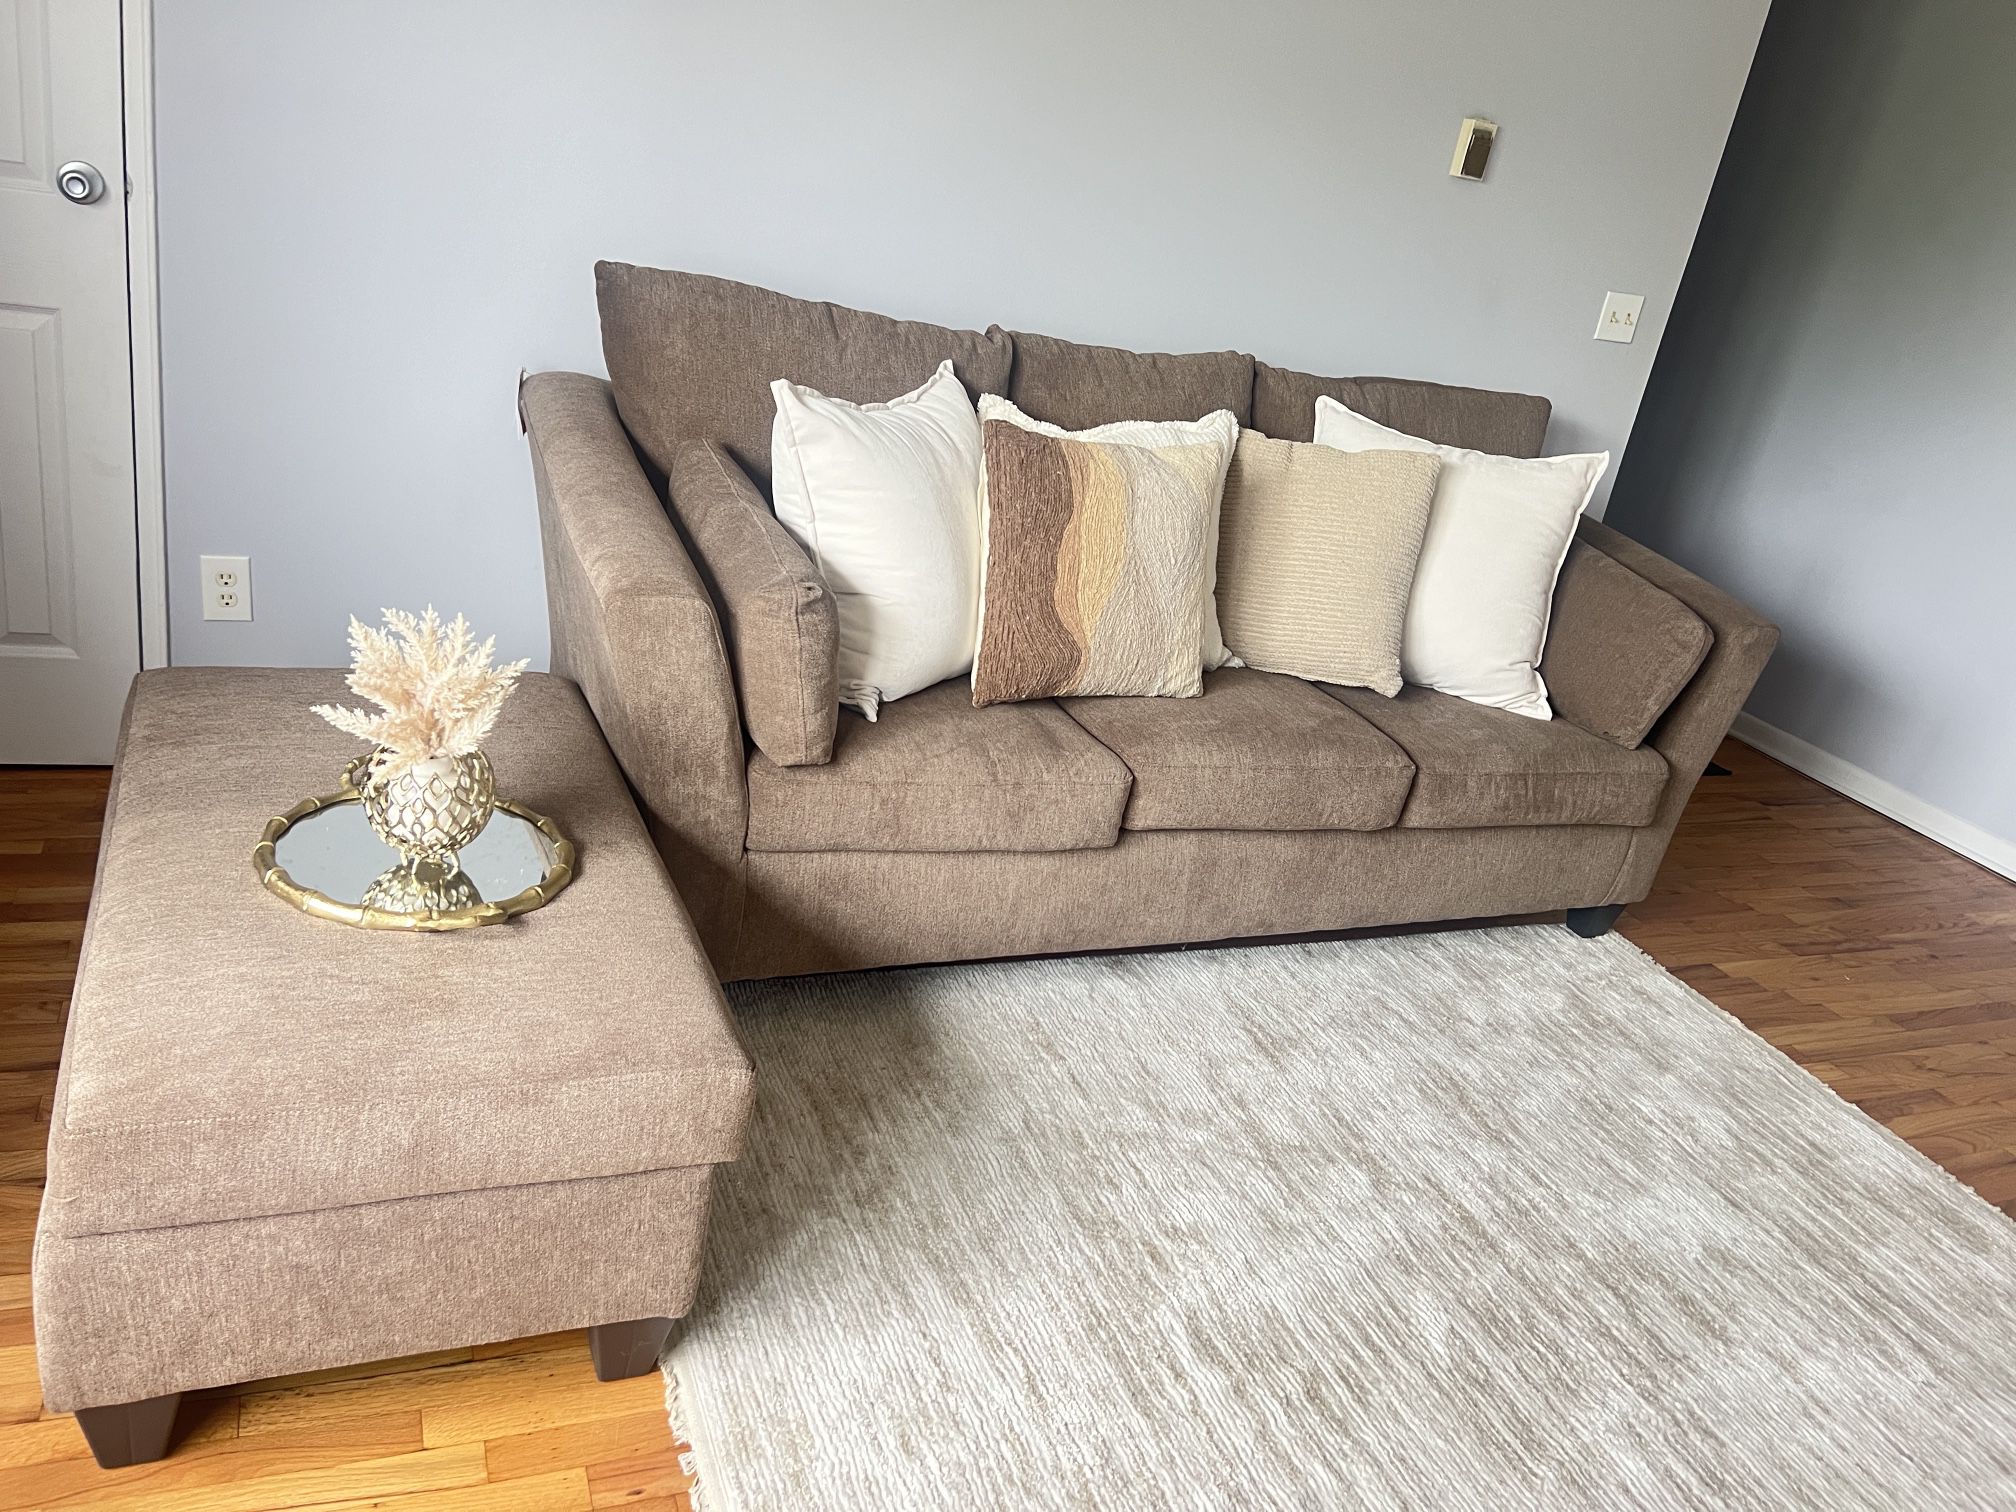 Beautiful 3months Old Couch And Ottoman for Sale$400